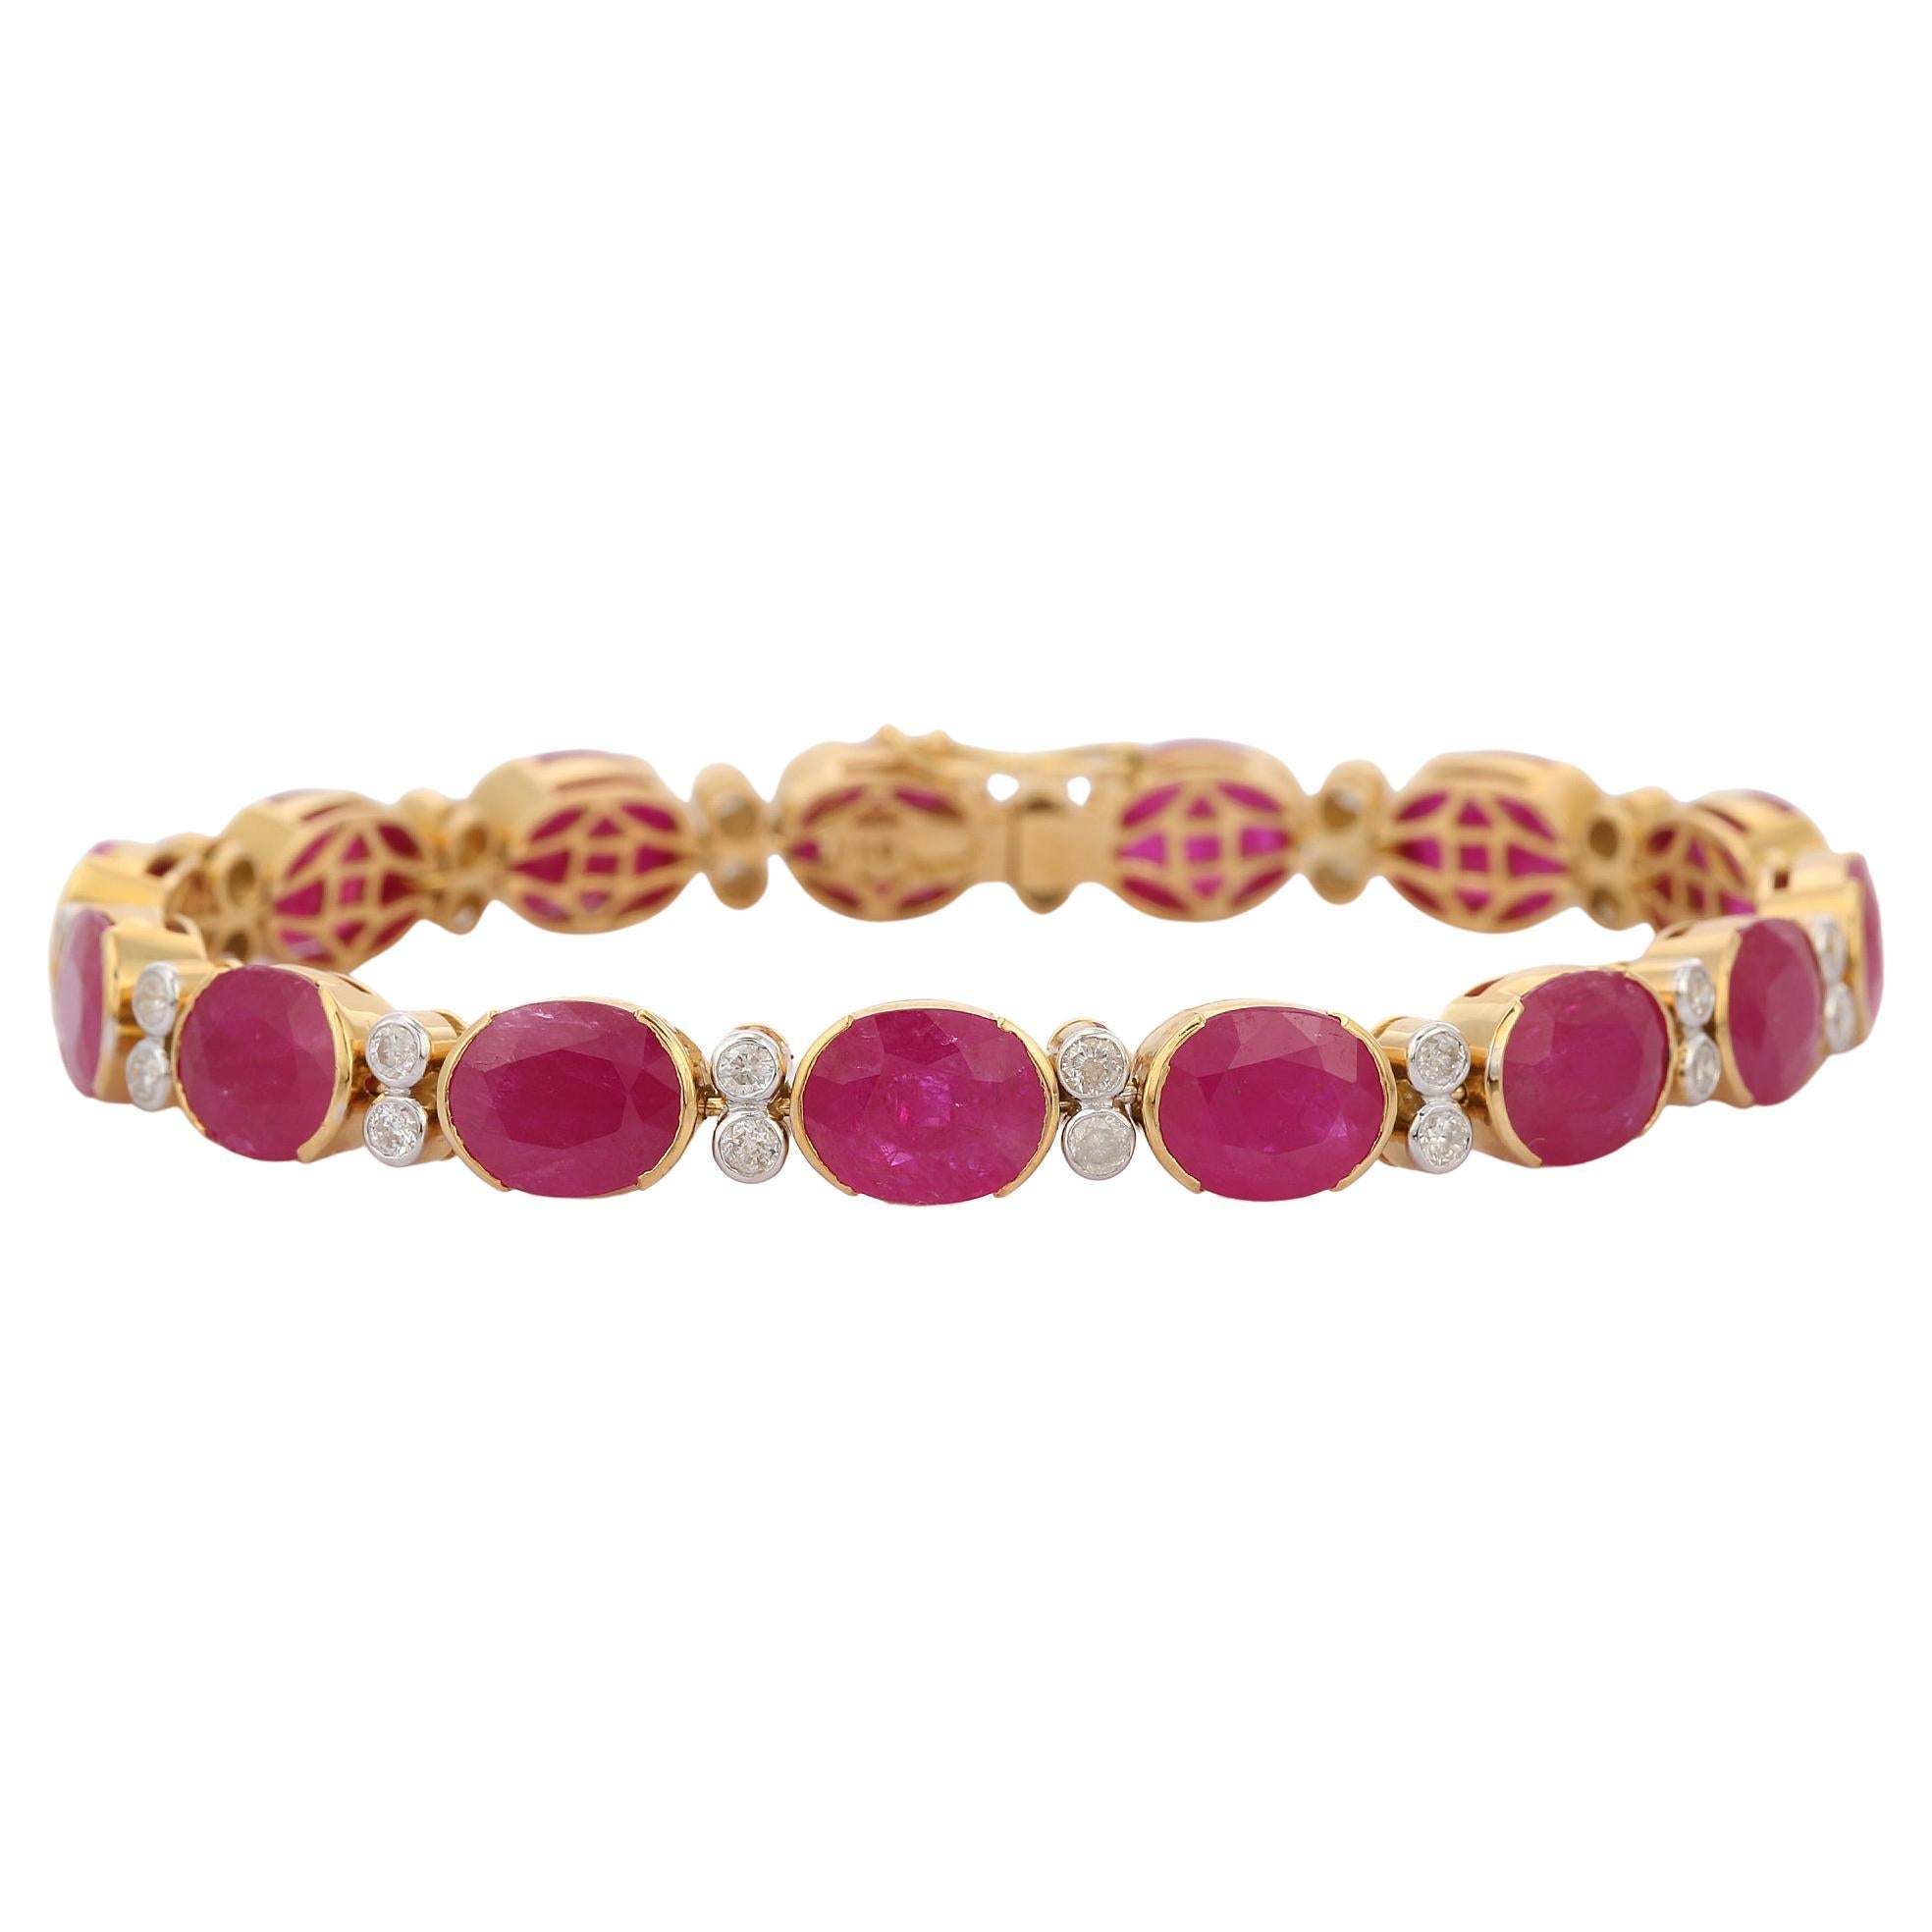 29.6 Cts Oval Cut Ruby and Diamond Bracelet in 18K Yellow Gold  For Sale